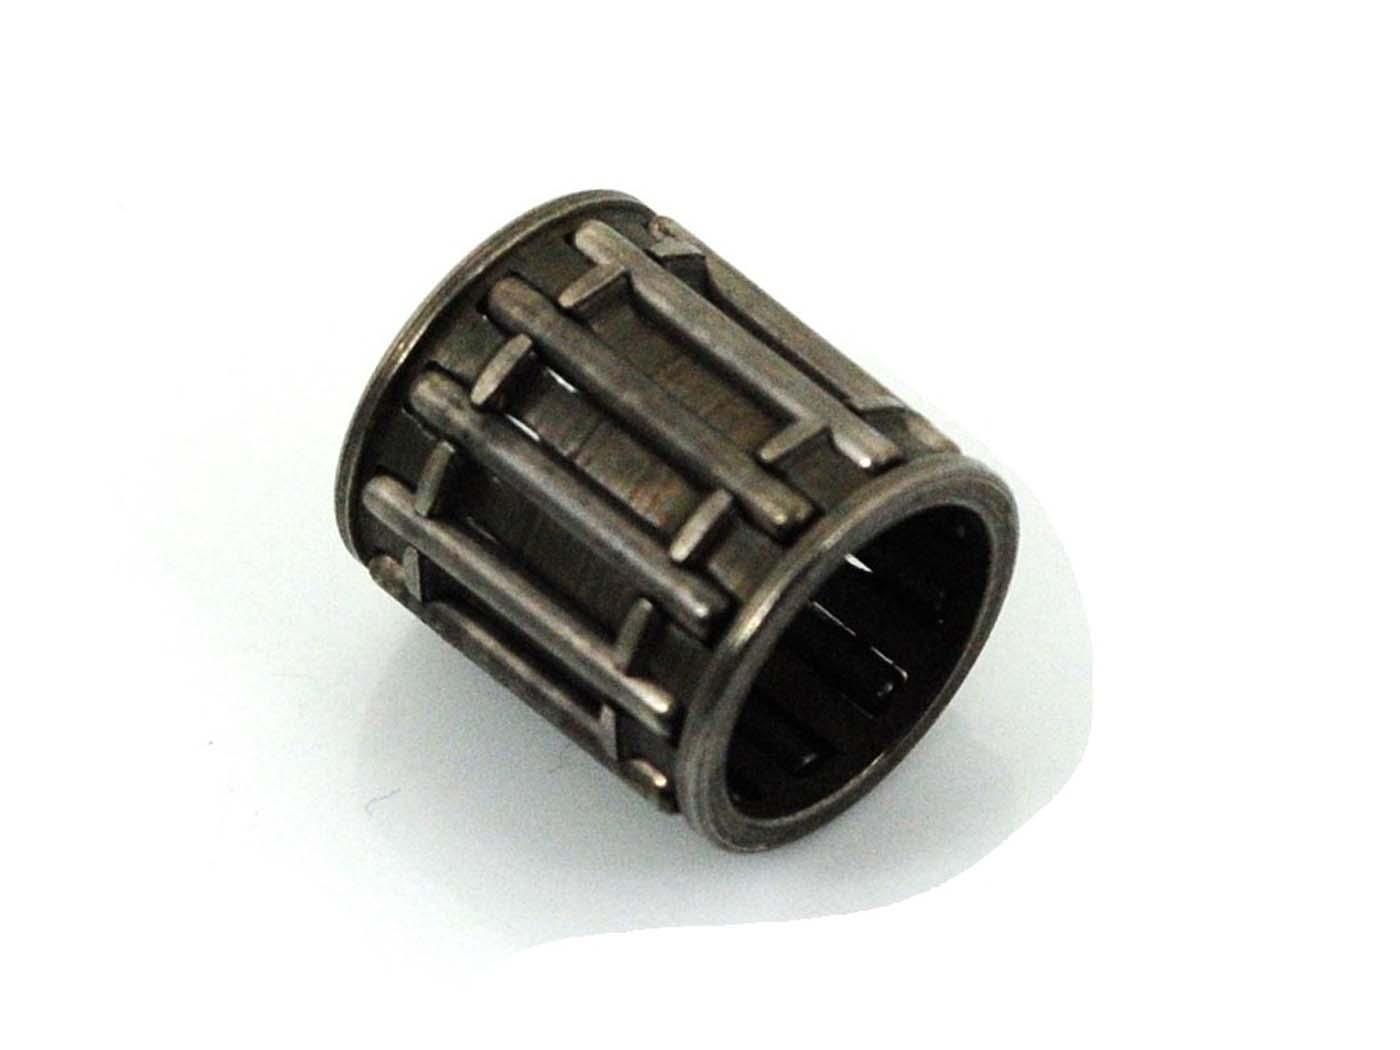 Piston Pin Needle Bearing 10mm X 13mm 14.5mm For Piaggio Ciao, Bravo SI Moped Moped